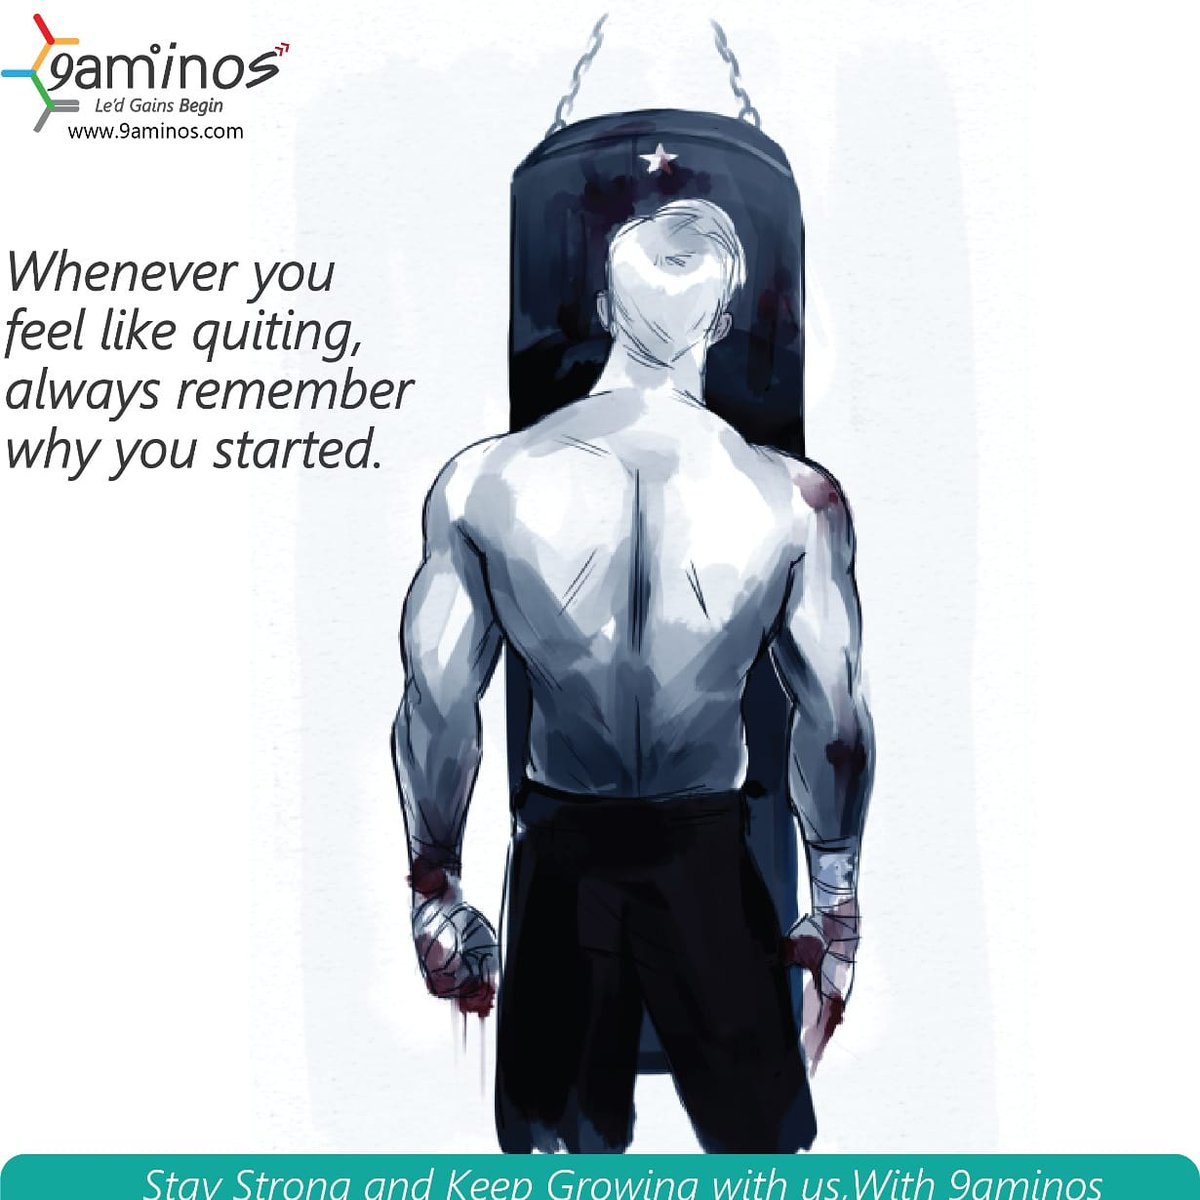 Whenever you feel like Quiting, always remember why you Started.
Come Let's succeed together.
#9aminos #gymmotivation #gyminspiratio #NeverQuit #stamina #enthusiasm #athelete #olympics #sportsaccessories #sportsnutrition @kheloindia @olymp @TwitterSports @SupportINDSport